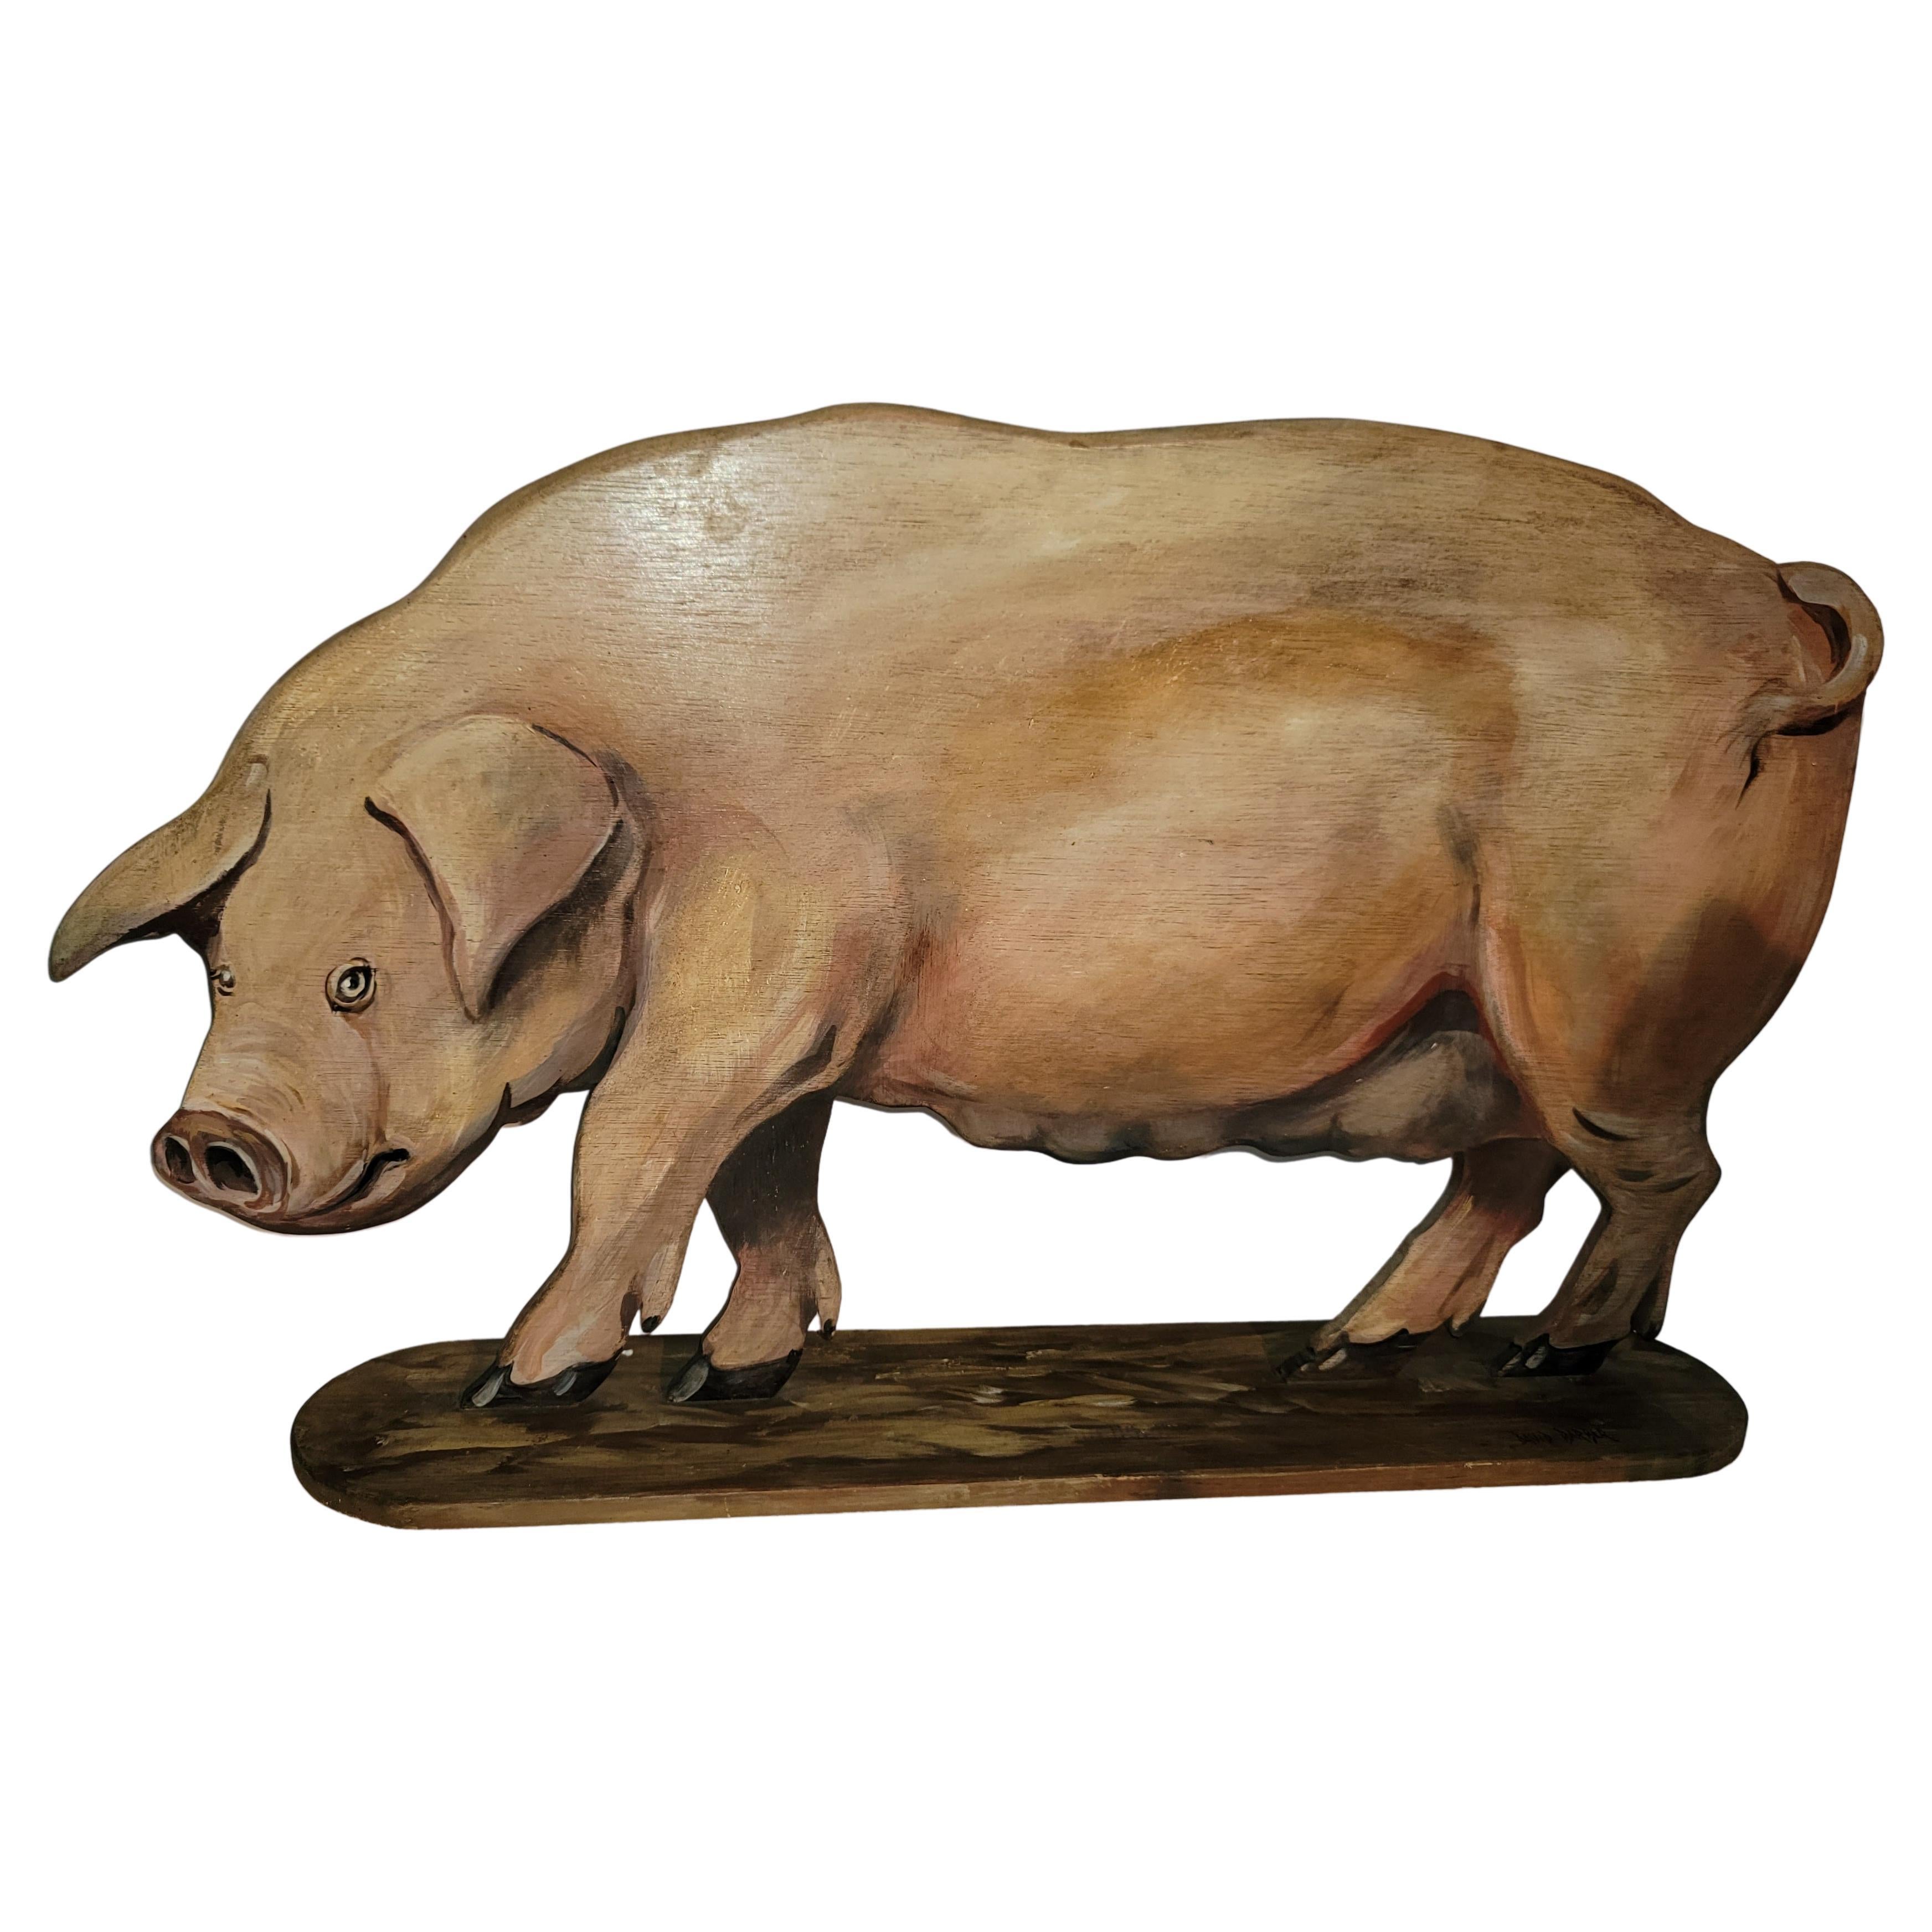 Hand Carved Wood Pig with Original Paint, Signed